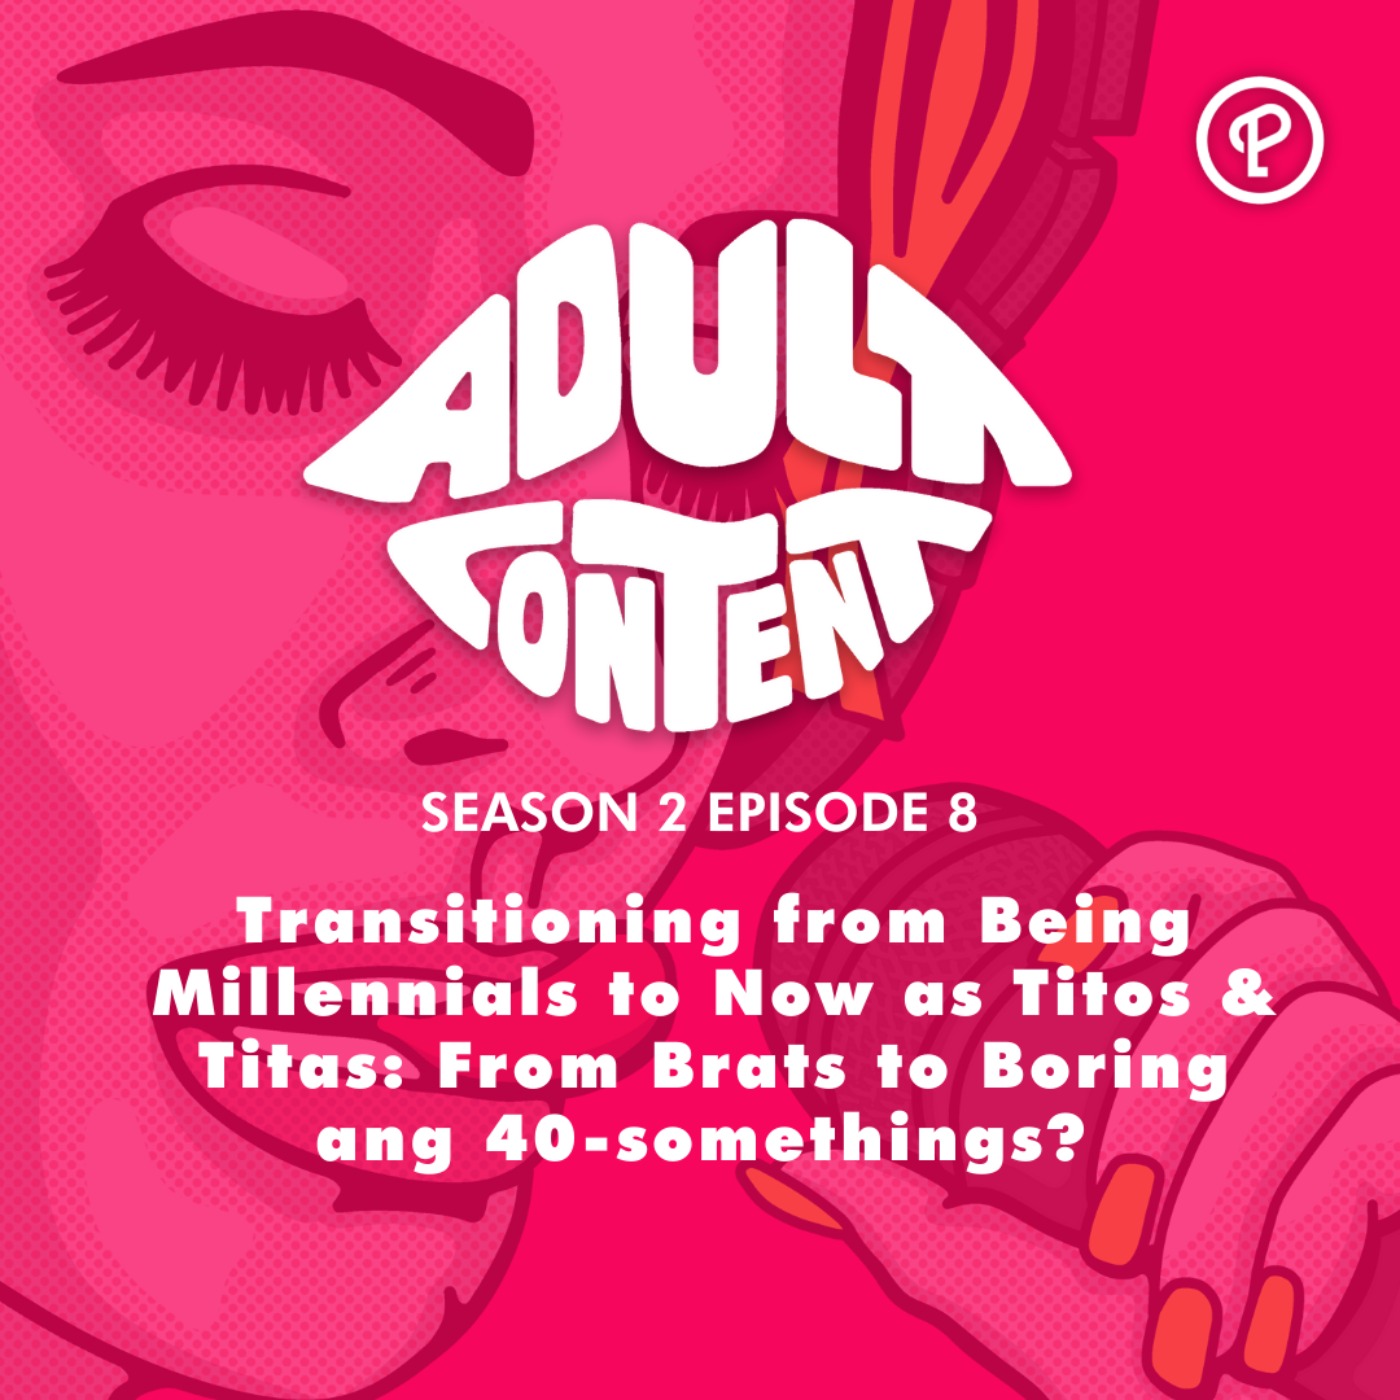 S2E8: Transitioning from Being Millennials to Now as Titos & Titas: From Brats to Boring ang 40-somethings?